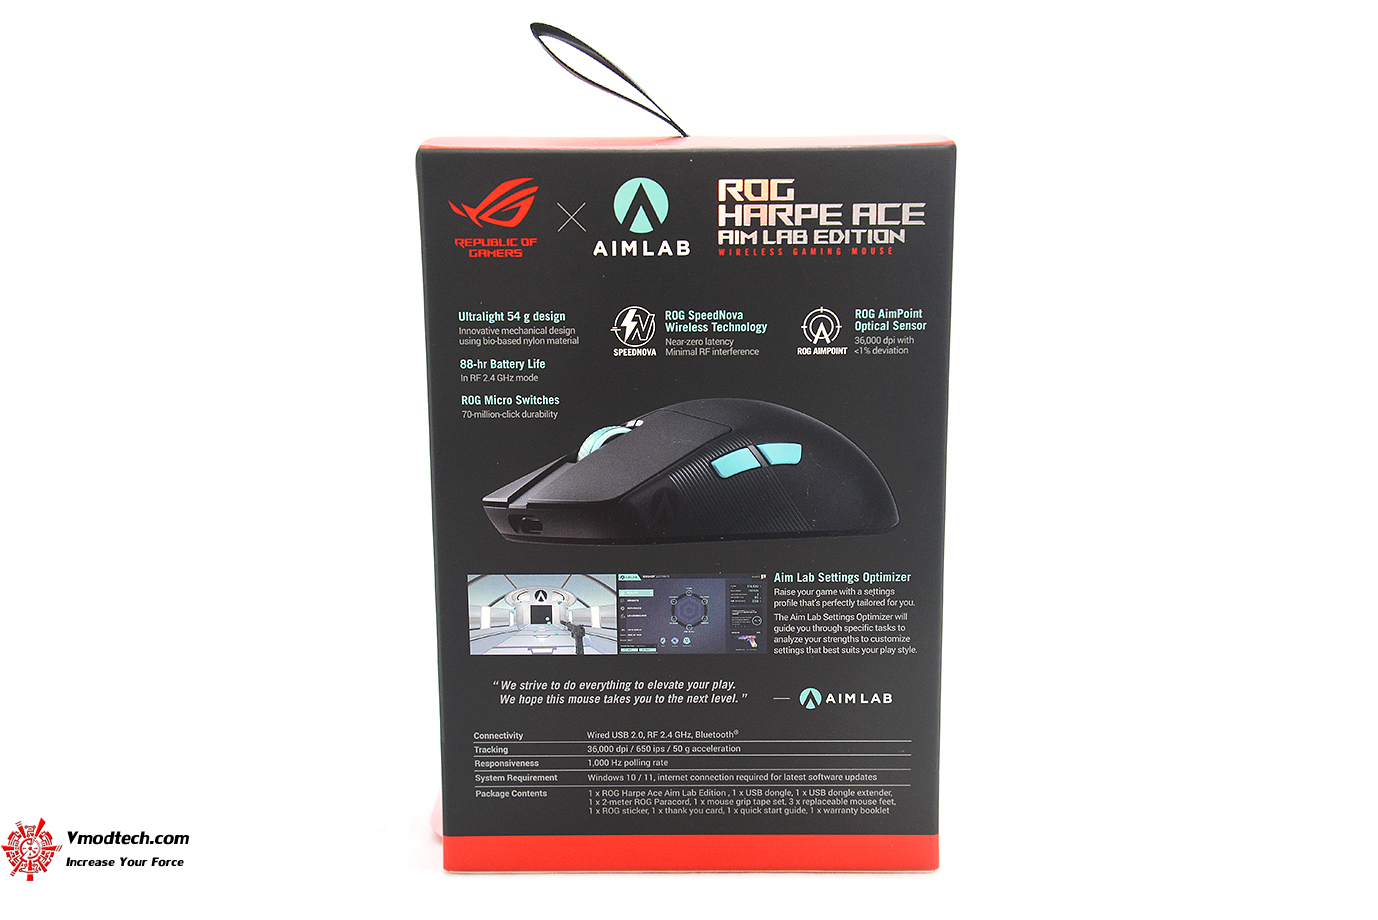 dsc 3774 ROG Harpe Ace Aim Lab Edition Wireless Gaming Mouse Review